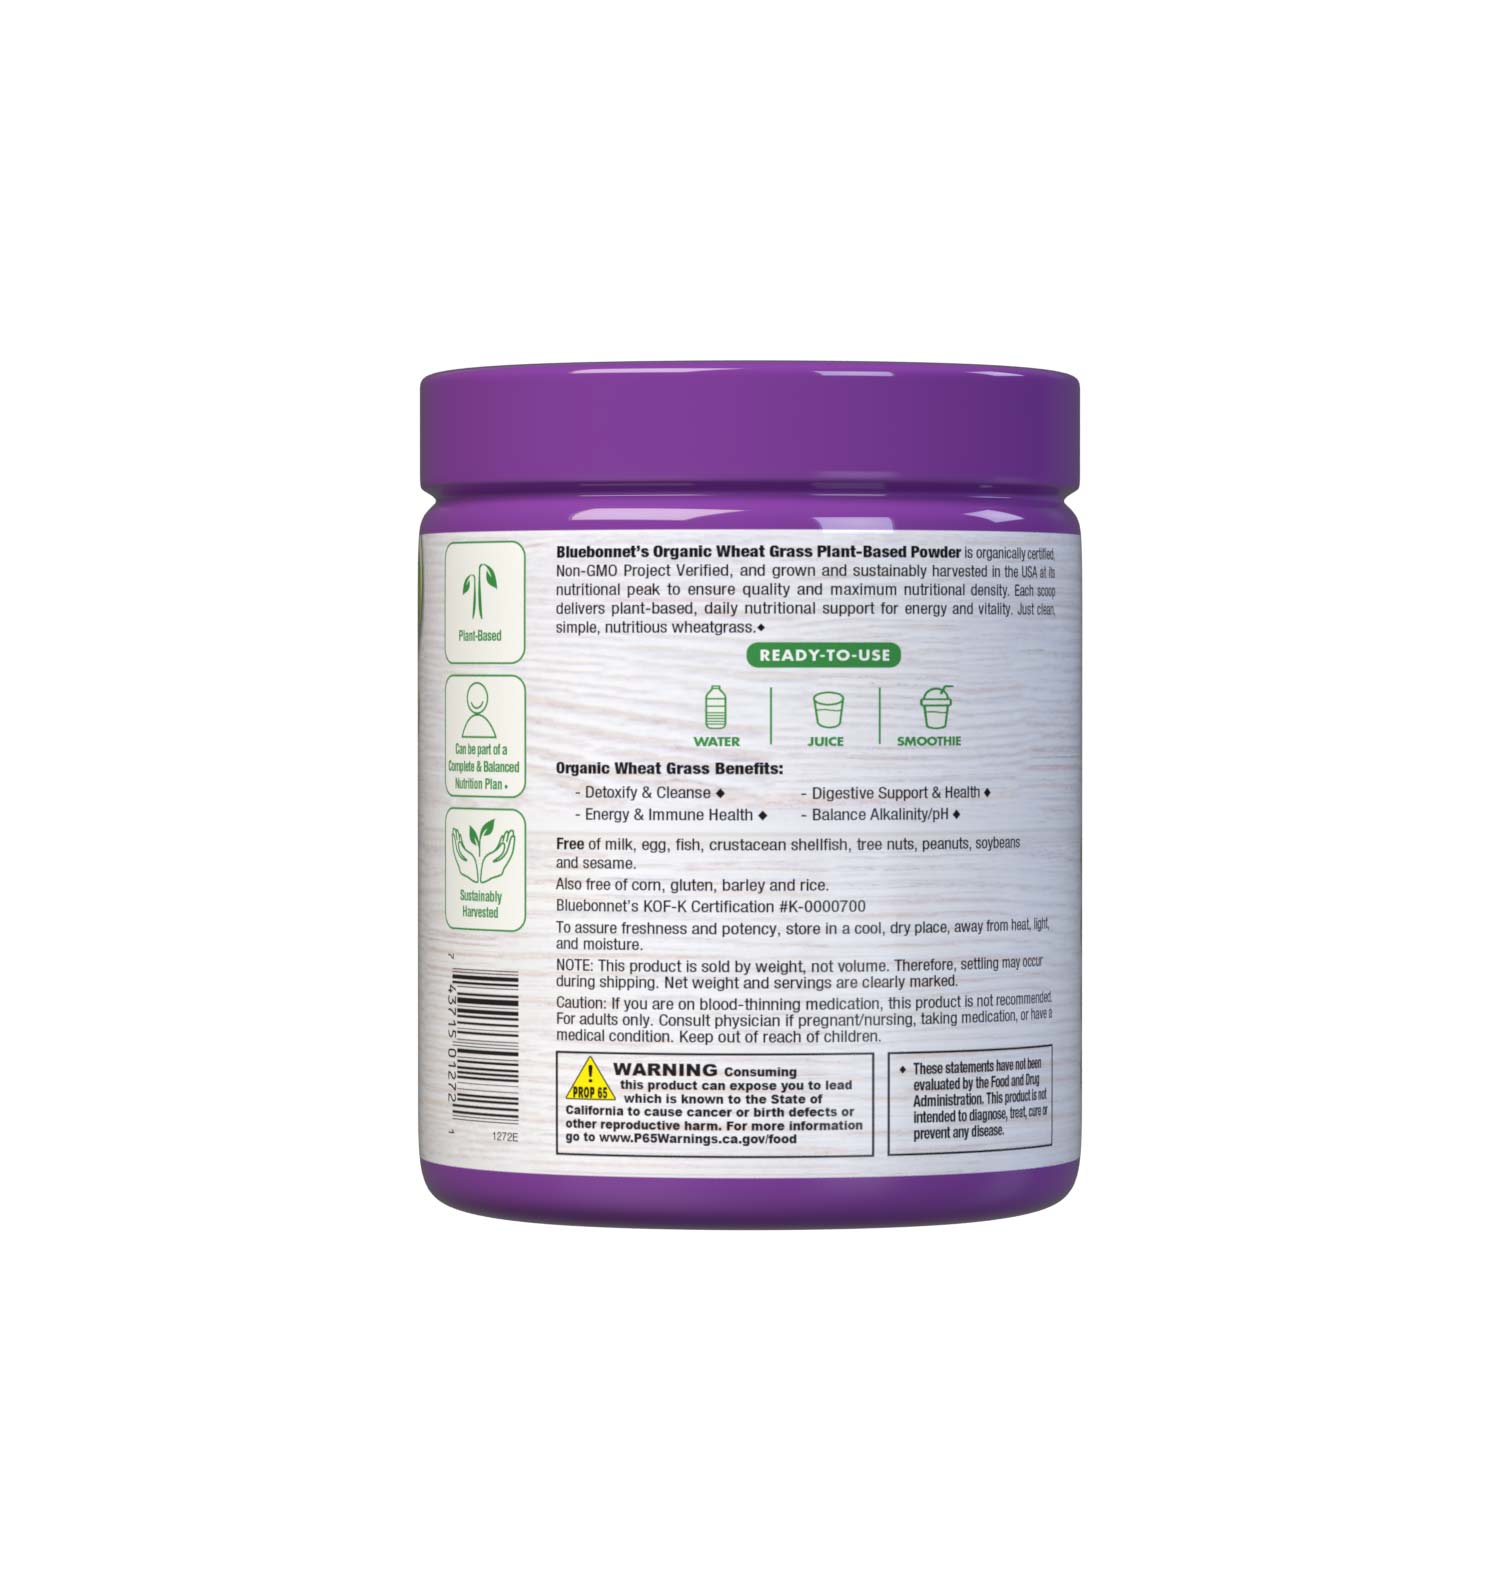 luebonnet’s Organic WheatGrass Powder provides 100% organic certified and non-GMO verified wheatgrass with no added sweeteners, flavors or colors. Description panel. #size_5.6oz